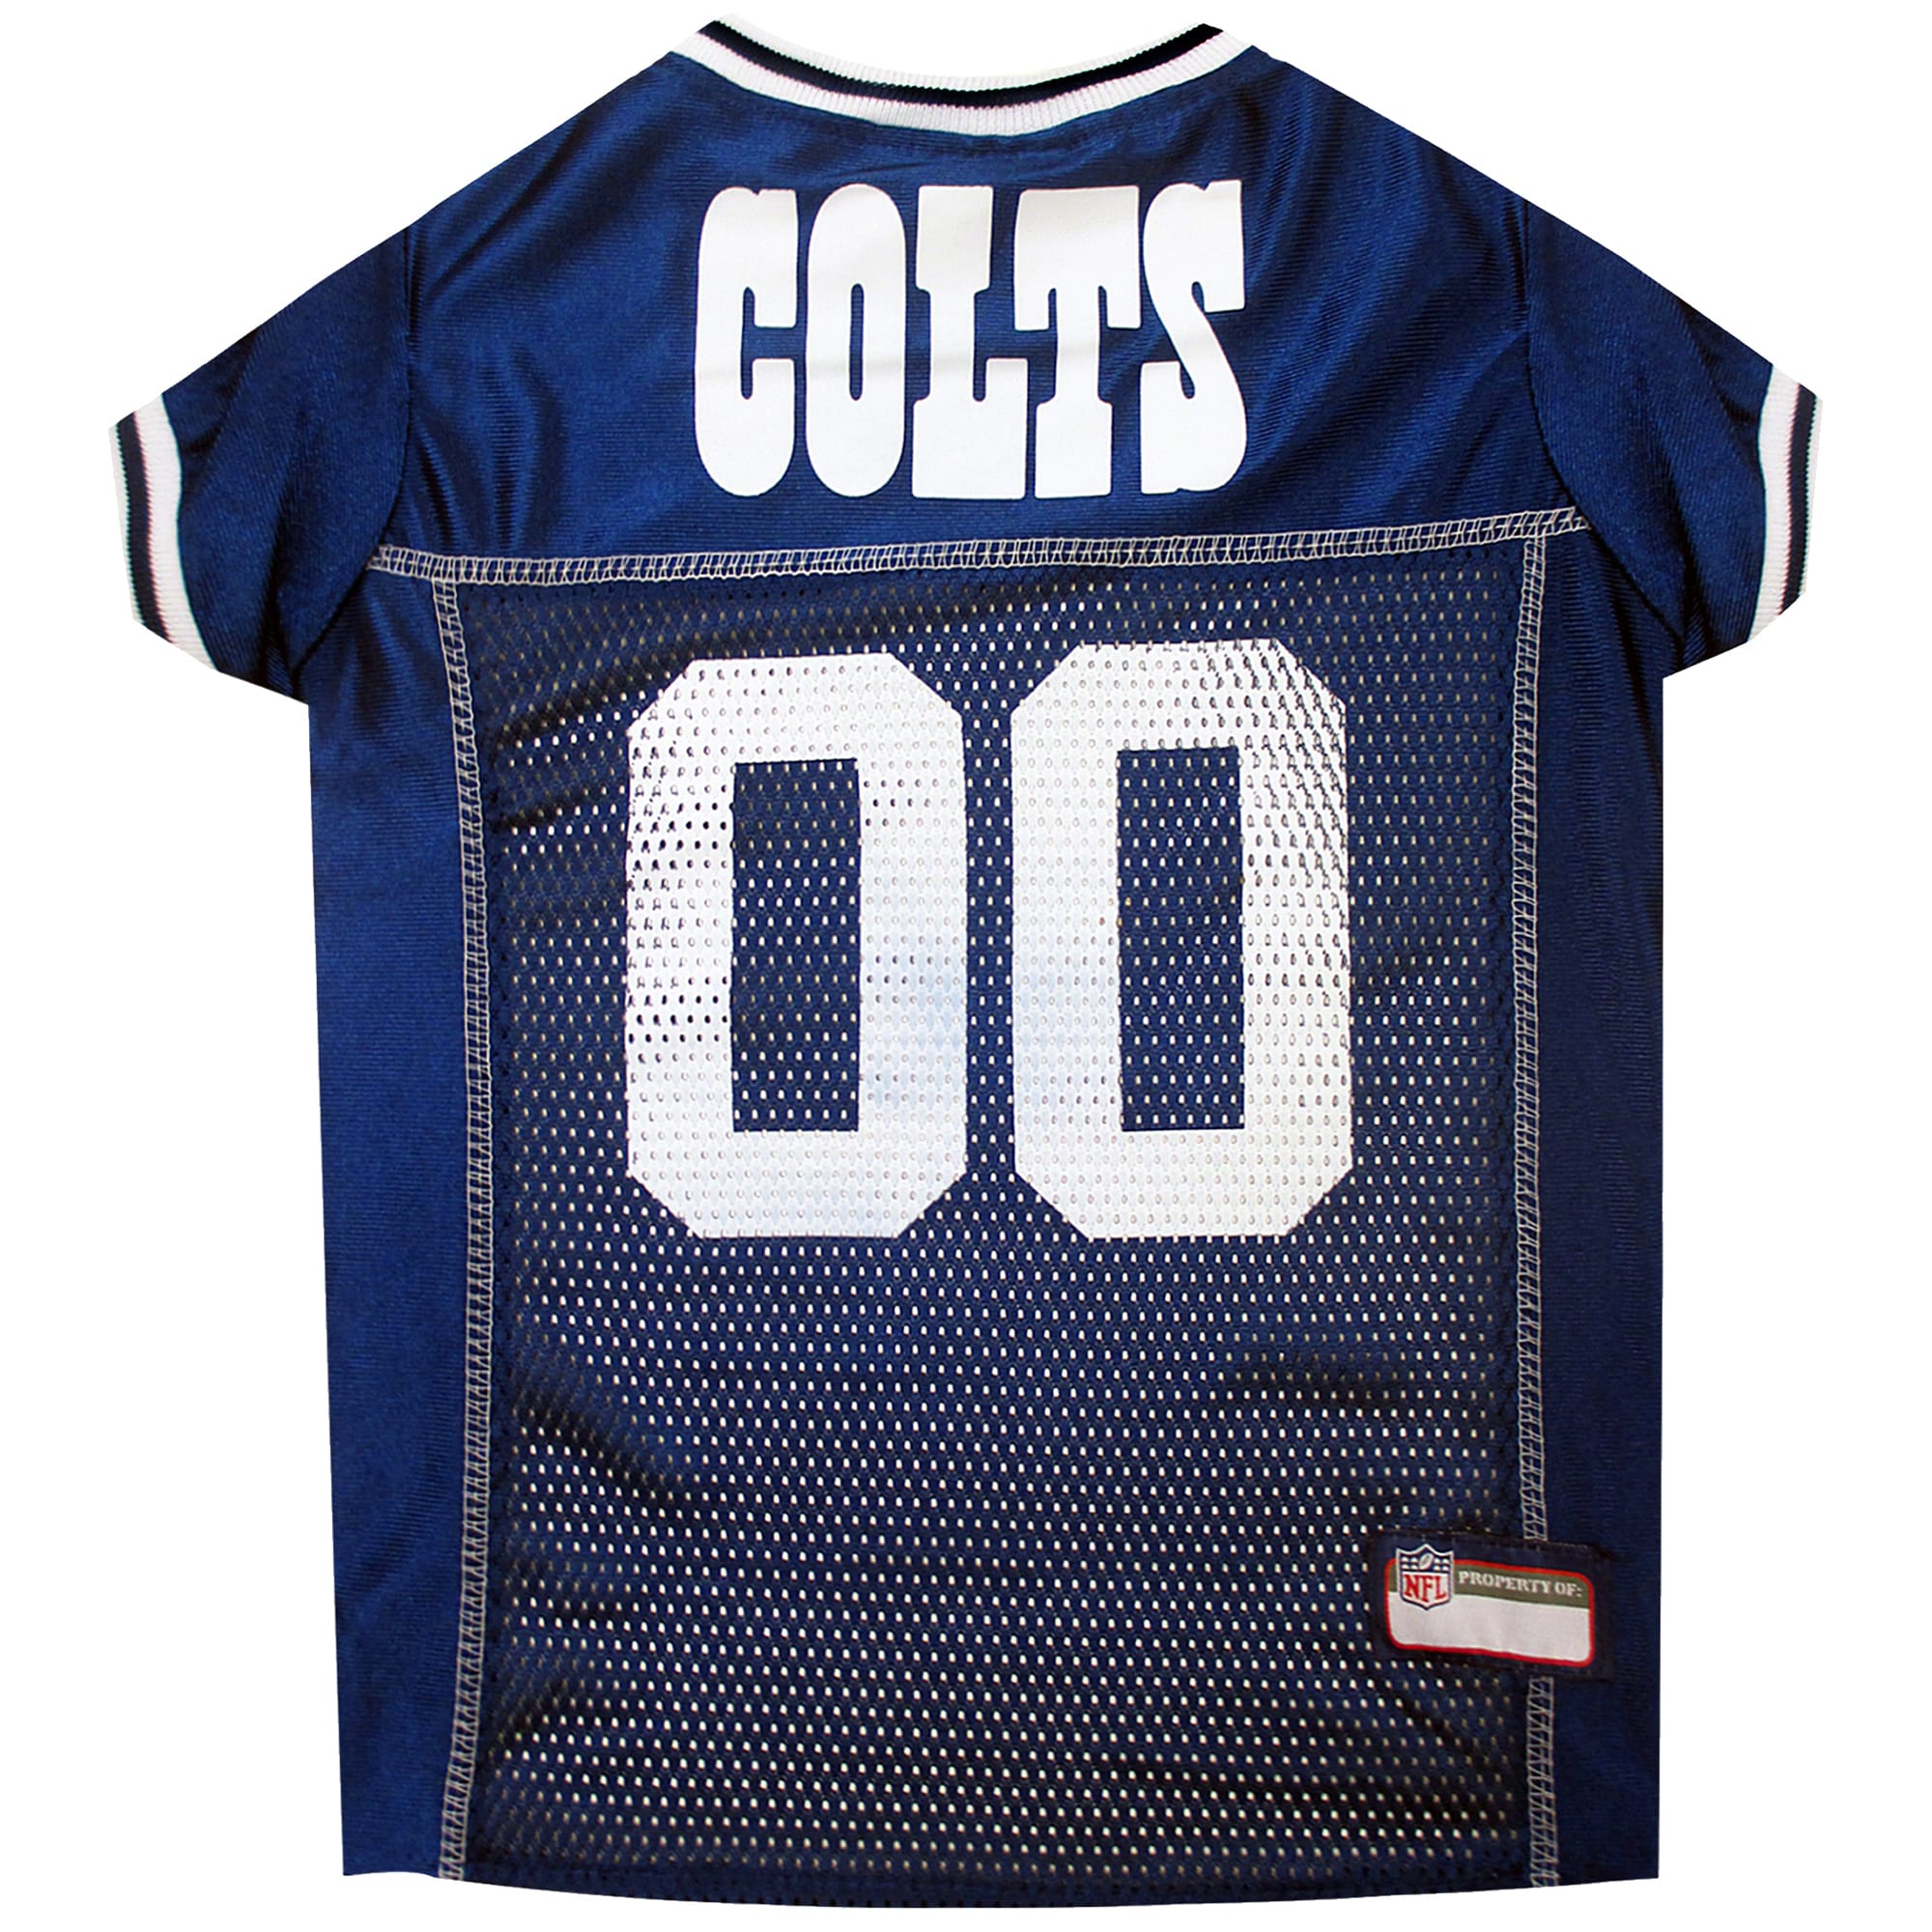  NFL Detroit Loins Dog Jersey, Size: Small. Best Football Jersey  Costume for Dogs & Cats. Licensed Jersey Shirt. : Sports & Outdoors